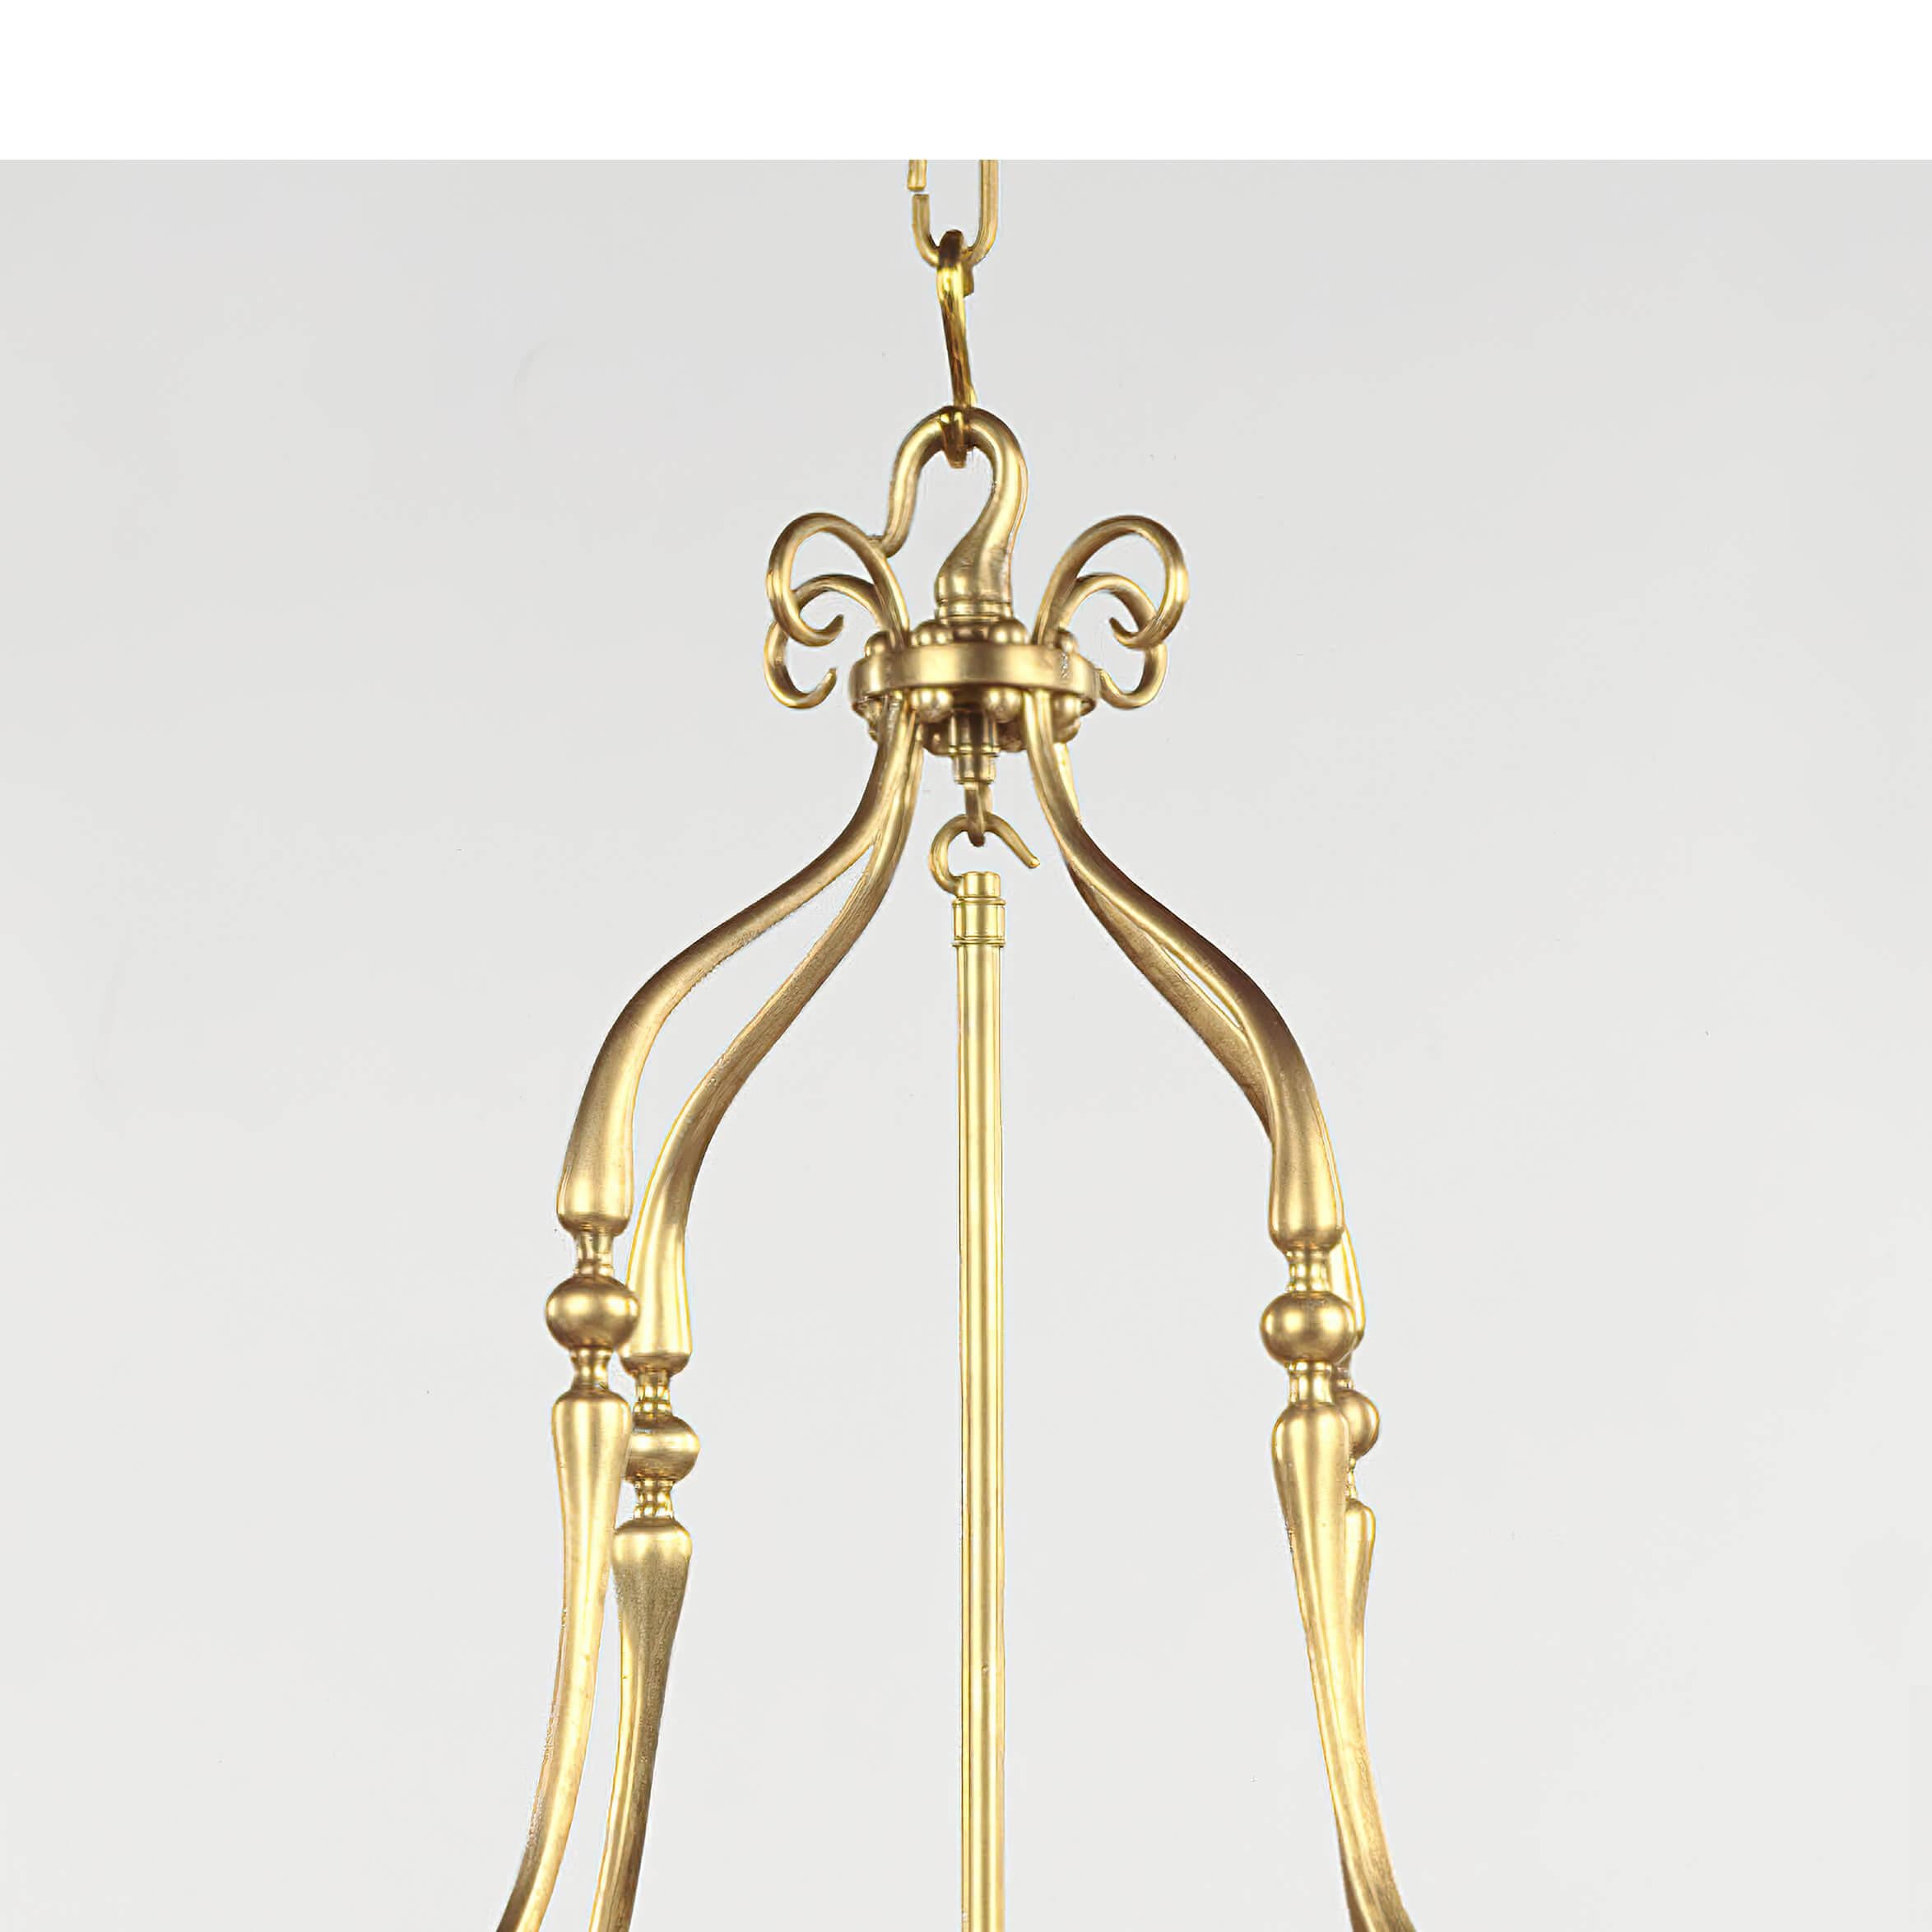 The large English Georgian brass round hall lantern typifies the traditional English style. With the scroll arm supports to the top, above a round frame with egg and dart molded edge and Roman Neo Classic form stop fluted column sides, fitted with